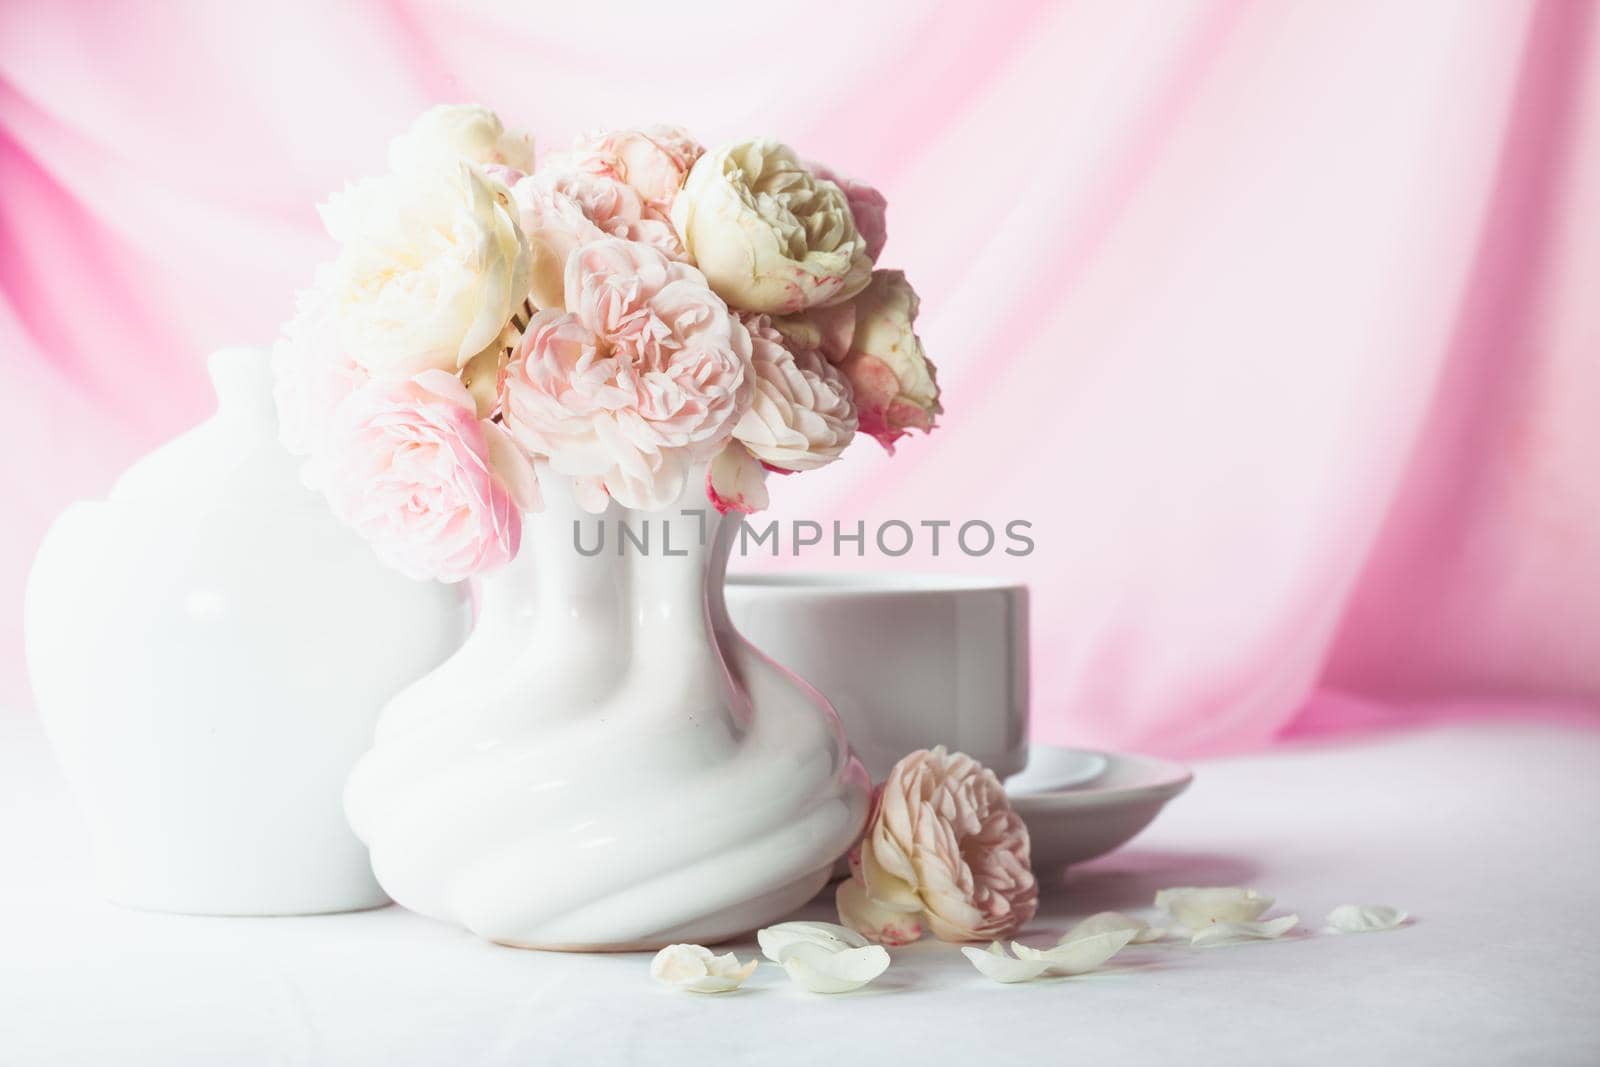 White and pink roses in a vase on the table